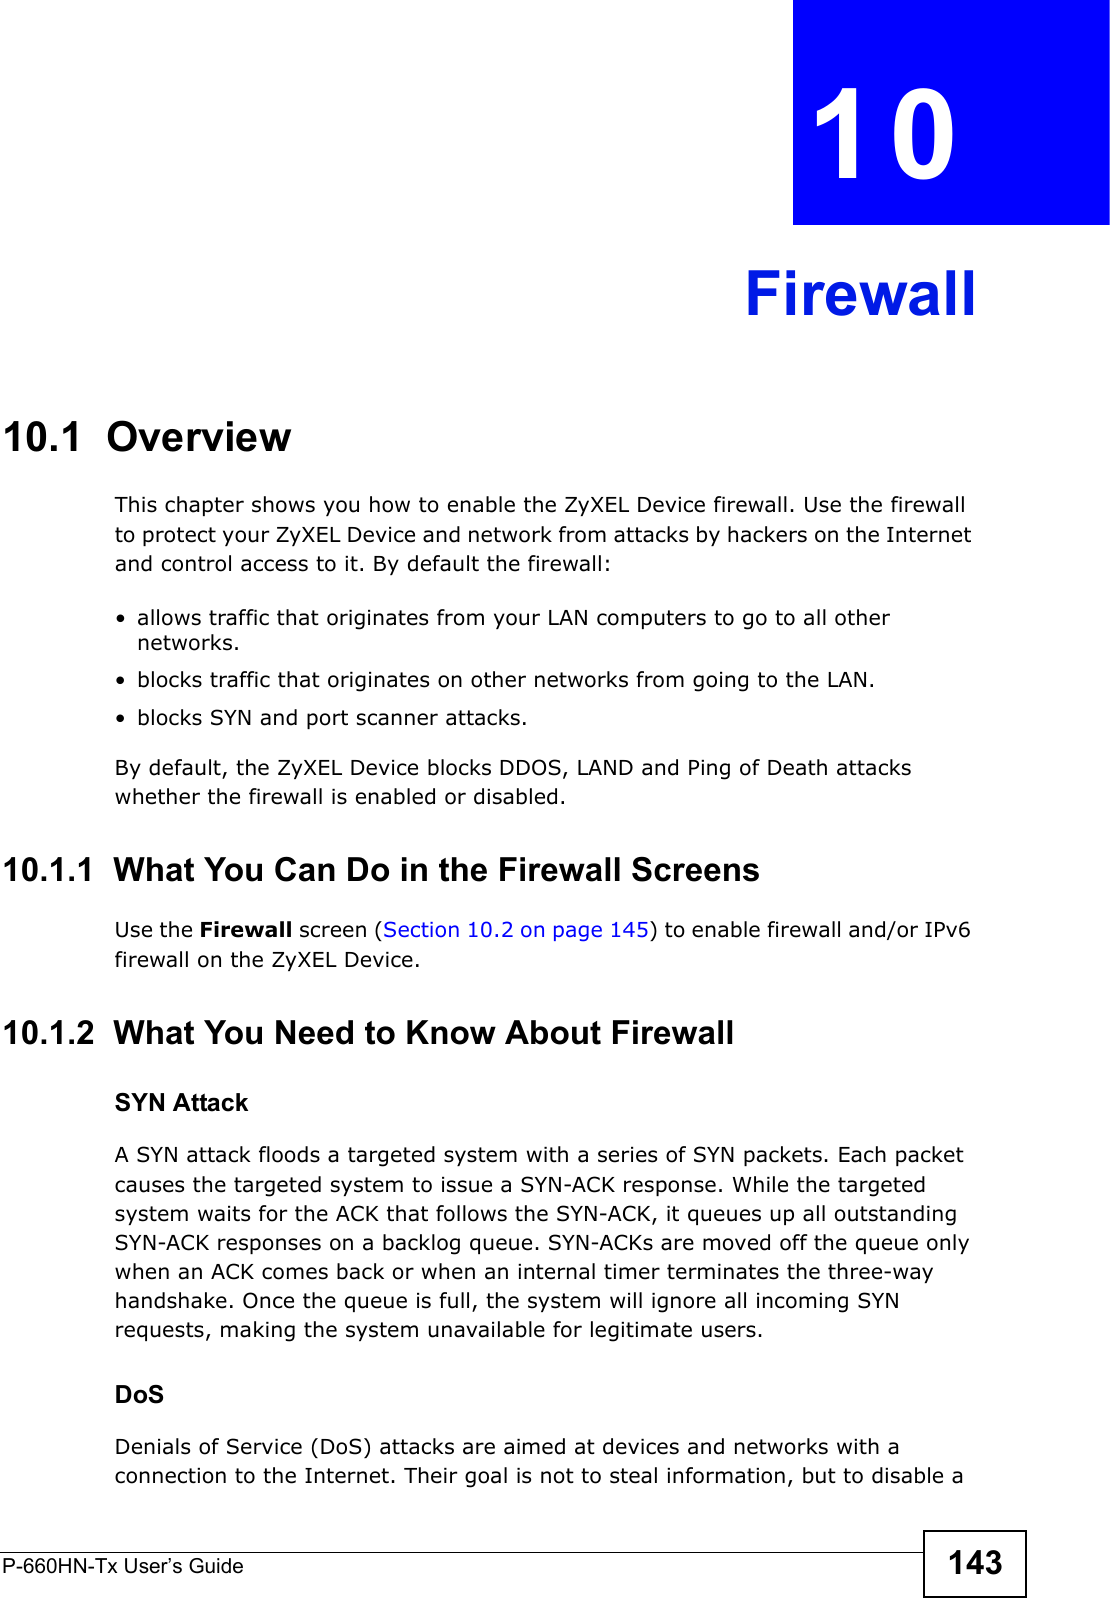 P-660HN-Tx User’s Guide 143CHAPTER  10 Firewall10.1  OverviewThis chapter shows you how to enable the ZyXEL Device firewall. Use the firewall to protect your ZyXEL Device and network from attacks by hackers on the Internet and control access to it. By default the firewall:• allows traffic that originates from your LAN computers to go to all other networks. • blocks traffic that originates on other networks from going to the LAN.• blocks SYN and port scanner attacks.By default, the ZyXEL Device blocks DDOS, LAND and Ping of Death attacks whether the firewall is enabled or disabled.10.1.1  What You Can Do in the Firewall ScreensUse the Firewall screen (Section 10.2 on page 145) to enable firewall and/or IPv6 firewall on the ZyXEL Device.10.1.2  What You Need to Know About FirewallSYN AttackA SYN attack floods a targeted system with a series of SYN packets. Each packet causes the targeted system to issue a SYN-ACK response. While the targeted system waits for the ACK that follows the SYN-ACK, it queues up all outstanding SYN-ACK responses on a backlog queue. SYN-ACKs are moved off the queue only when an ACK comes back or when an internal timer terminates the three-way handshake. Once the queue is full, the system will ignore all incoming SYN requests, making the system unavailable for legitimate users.DoSDenials of Service (DoS) attacks are aimed at devices and networks with a connection to the Internet. Their goal is not to steal information, but to disable a 